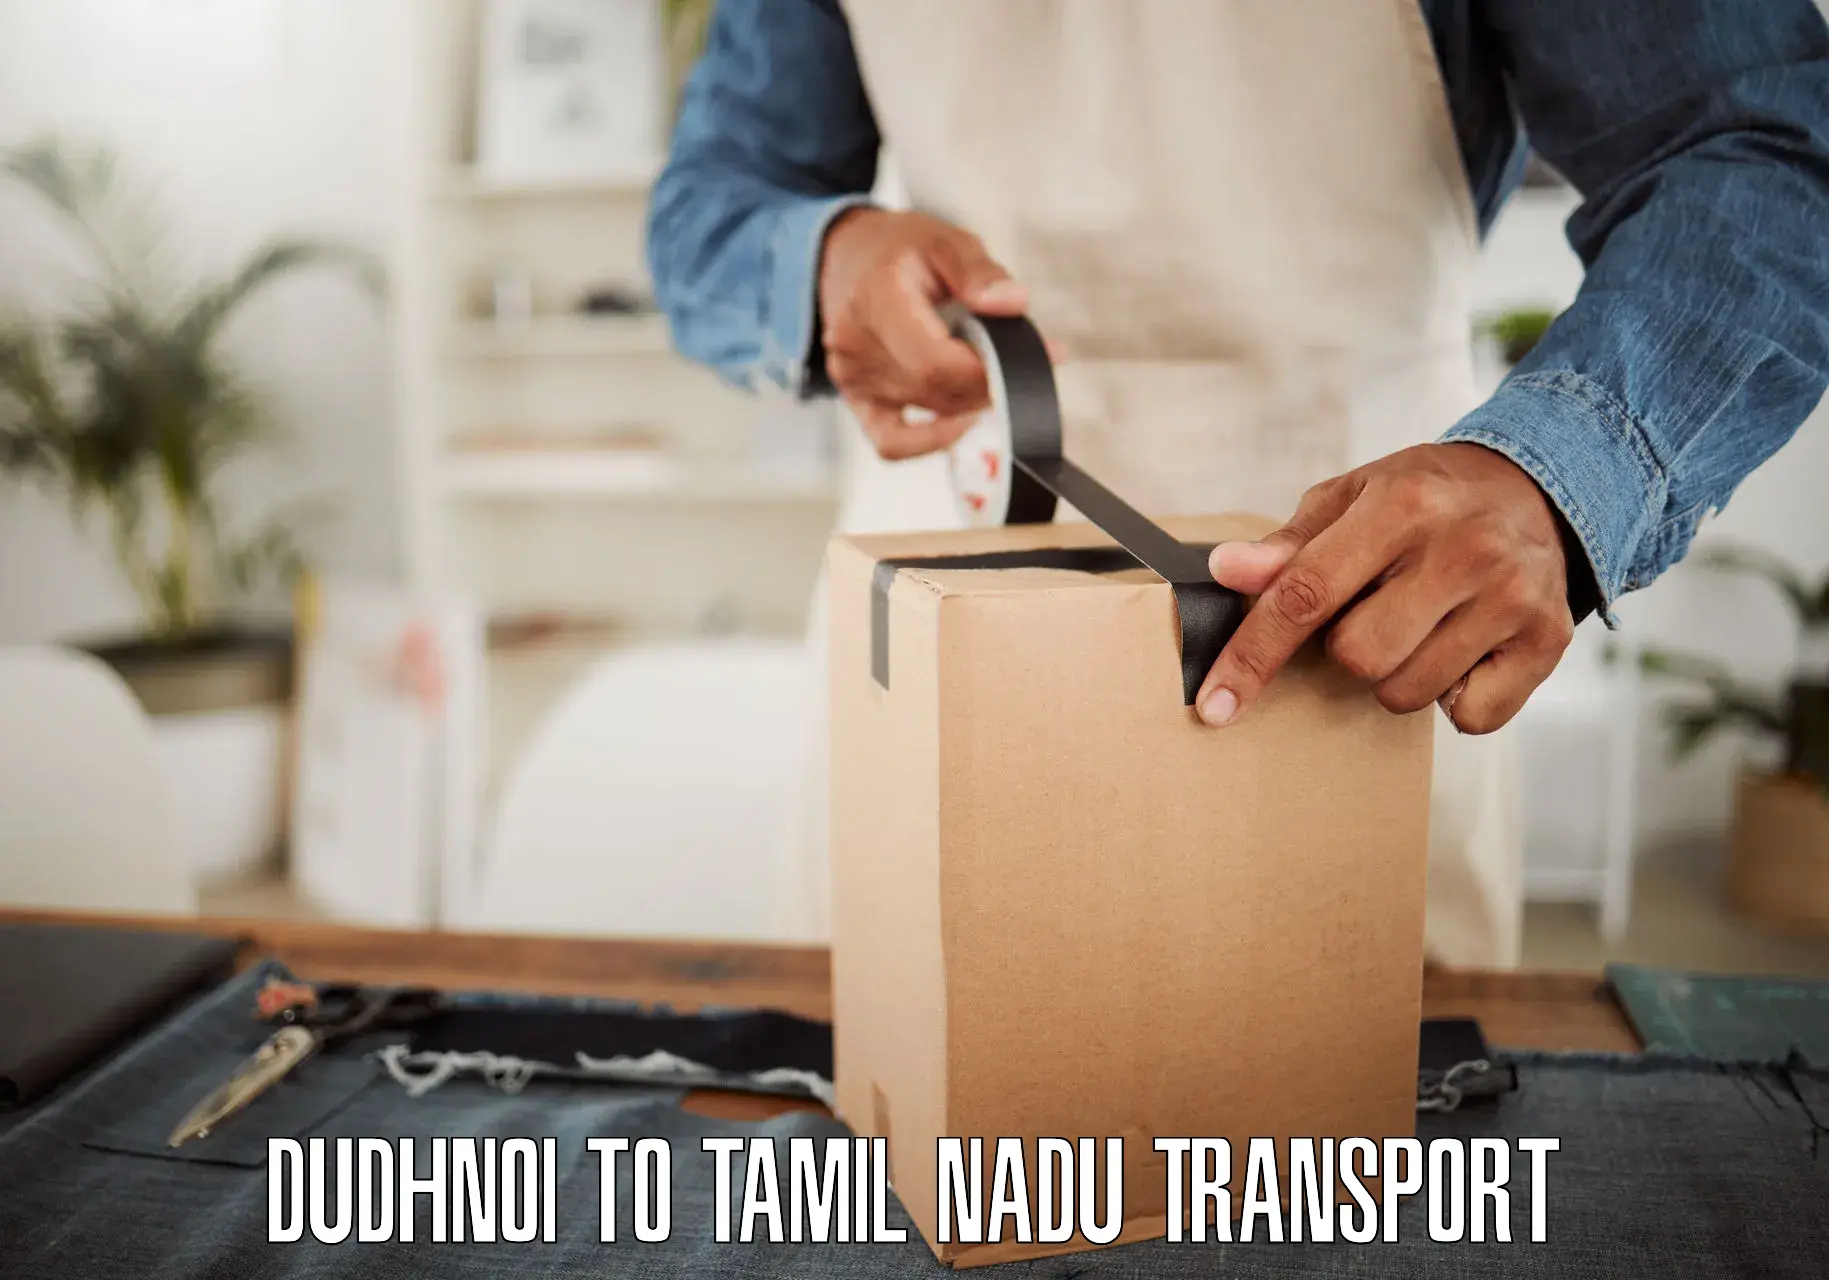 Truck transport companies in India in Dudhnoi to Cuddalore